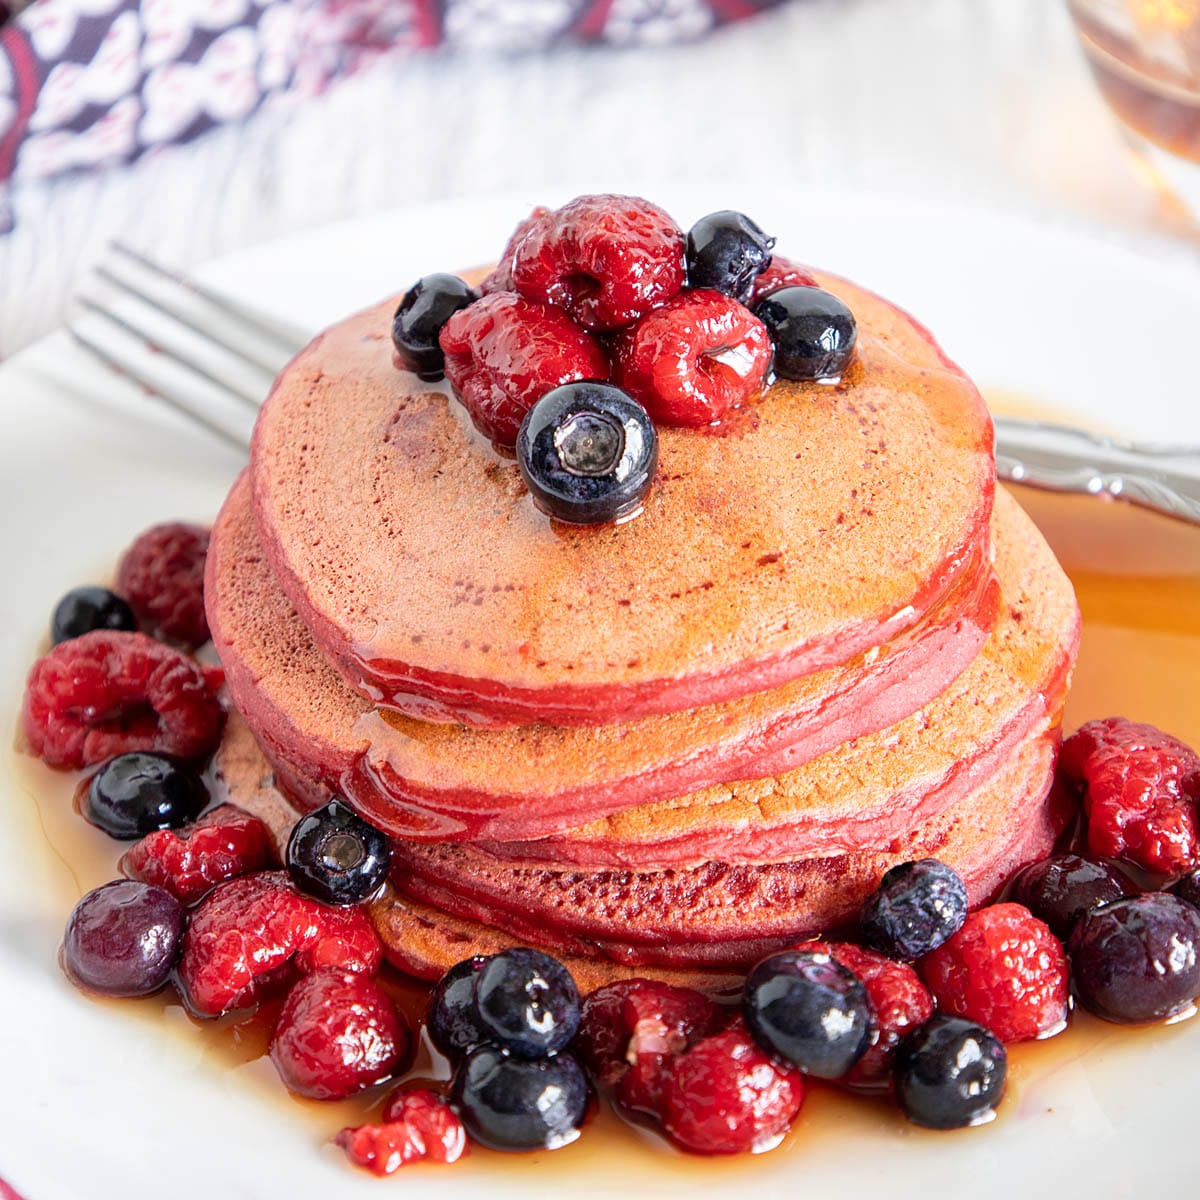 Beetroot Pancakes on a plate with blueberries and raspberries.